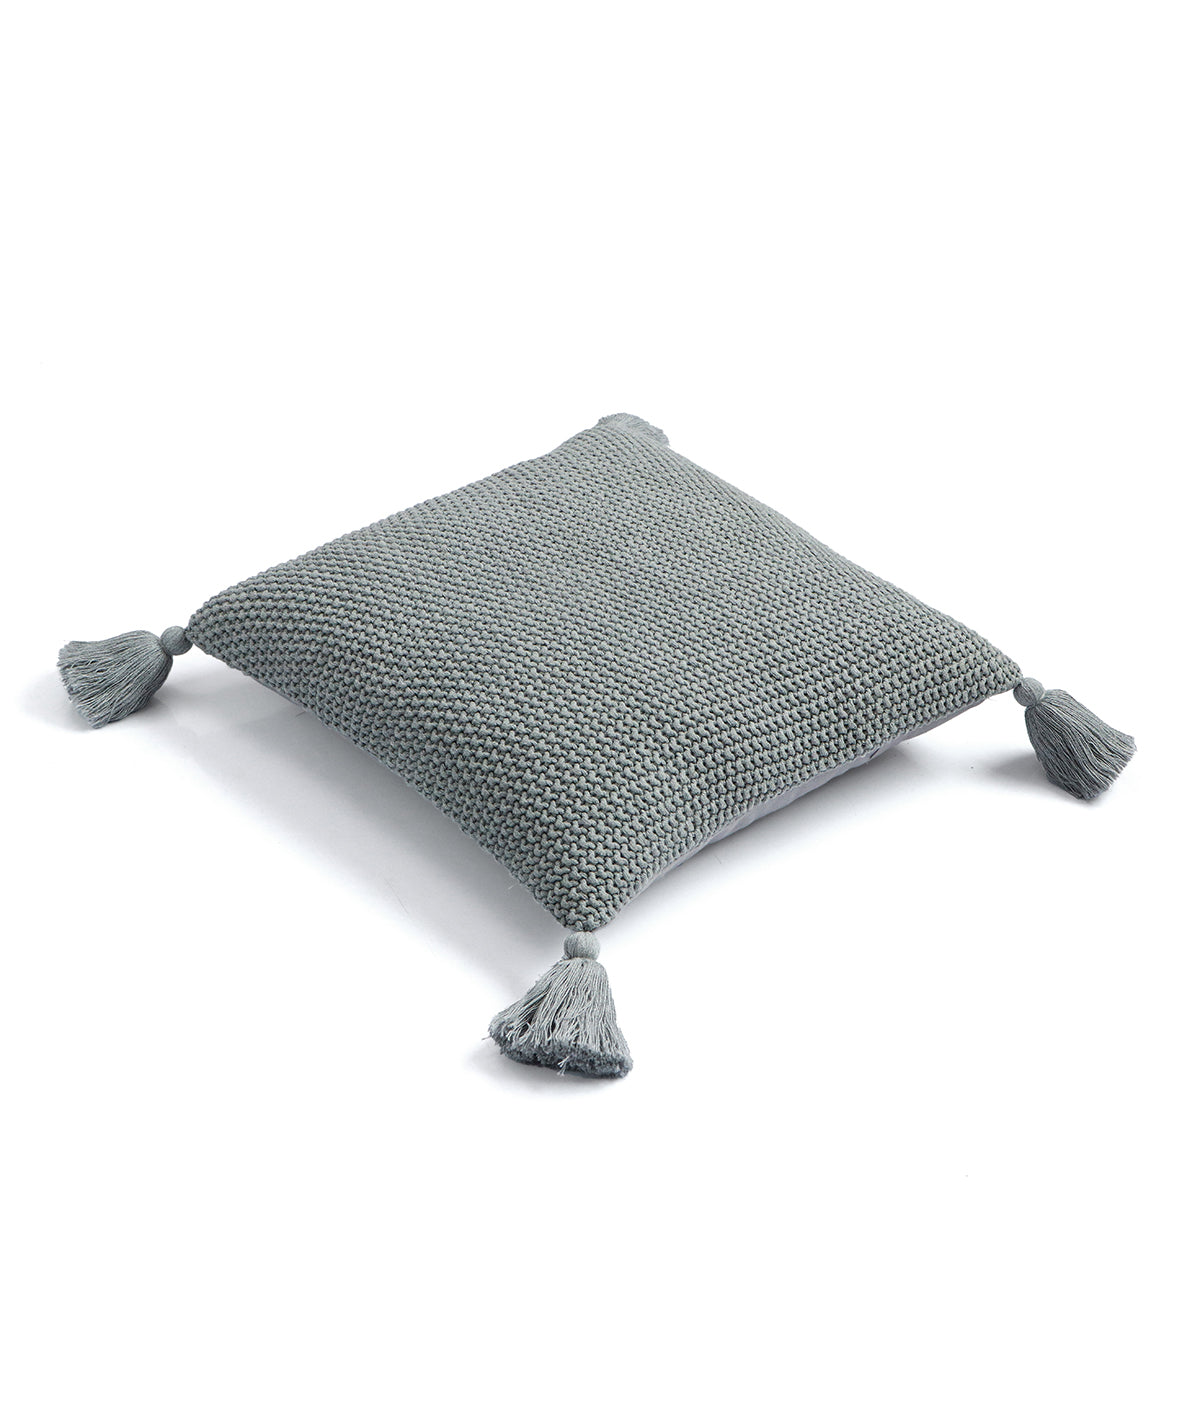 Moss knit Cotton Knitted Decorative Cushion Cover (Light Grey Melange) (16" x 16")